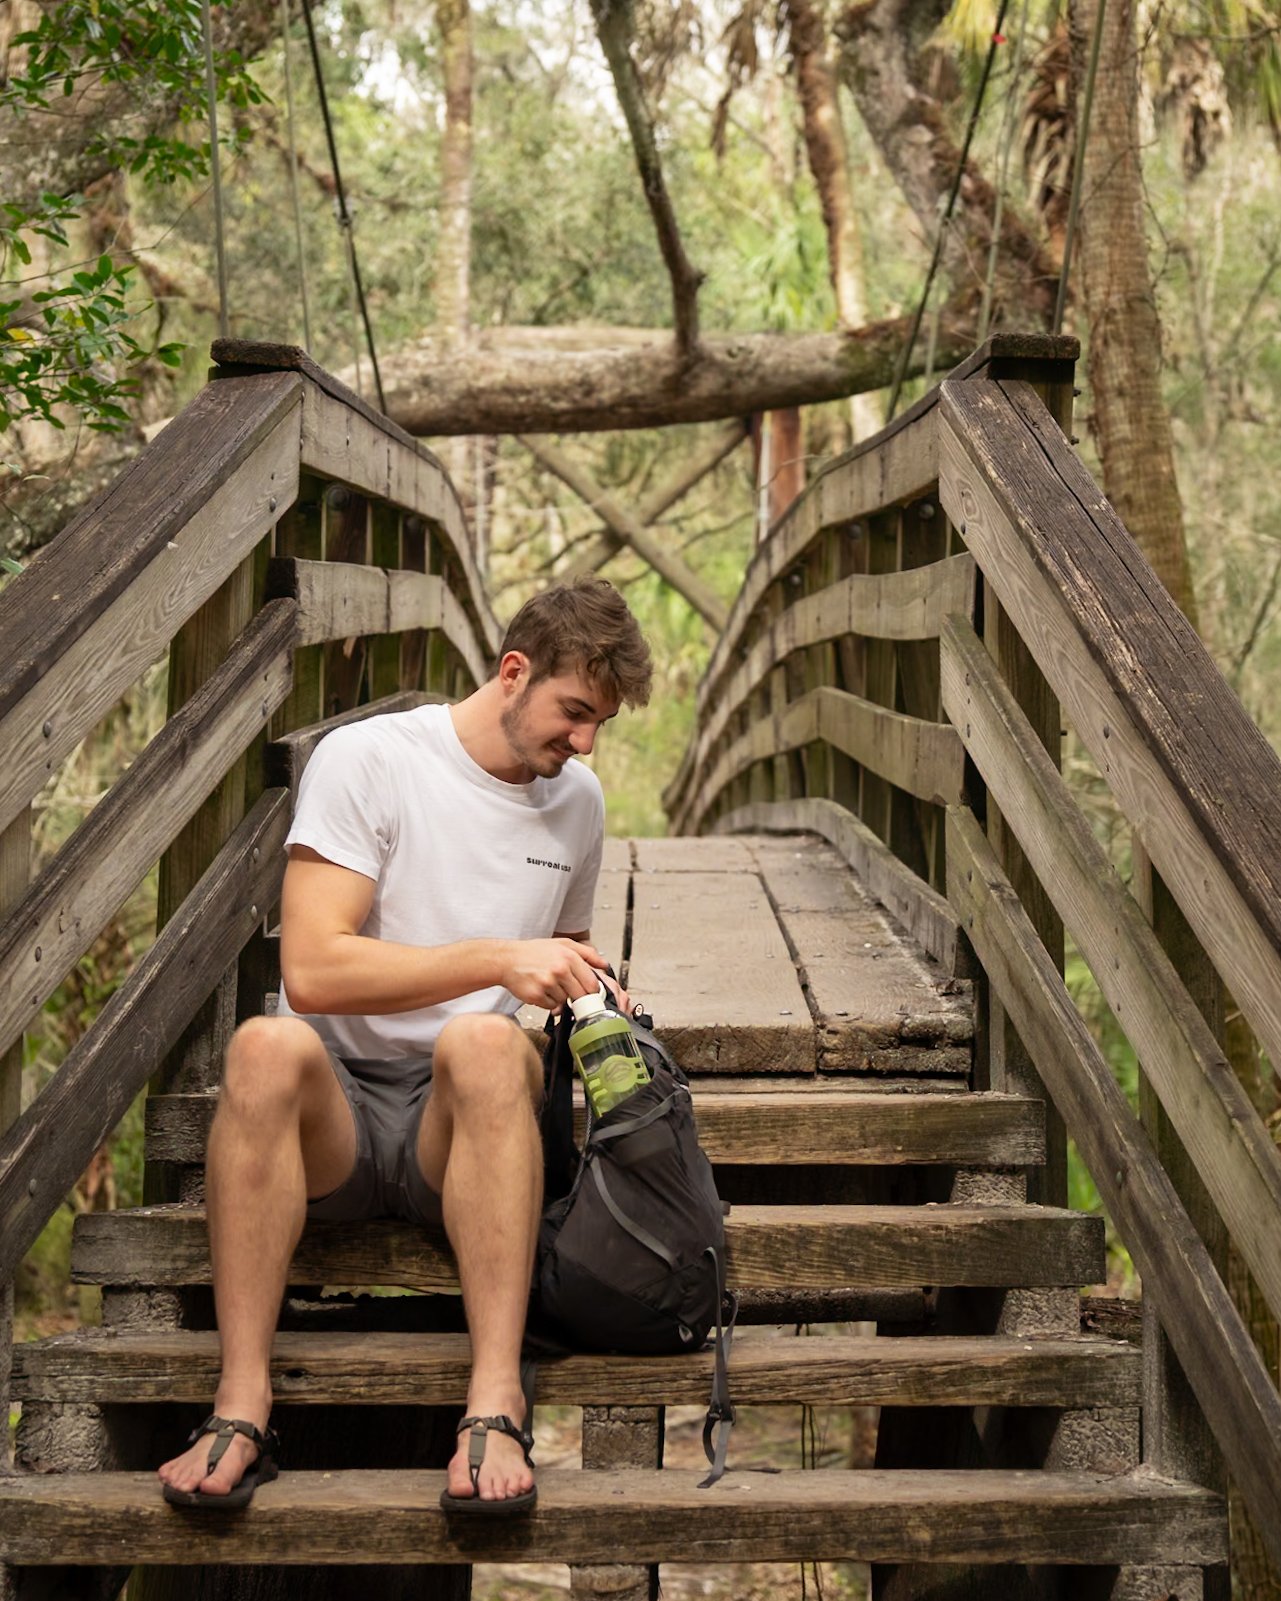 A man sits comfortably on wooden stairs amidst a serene forest setting, captured in the process of retrieving an army green Glaskco water bottle from his backpack.